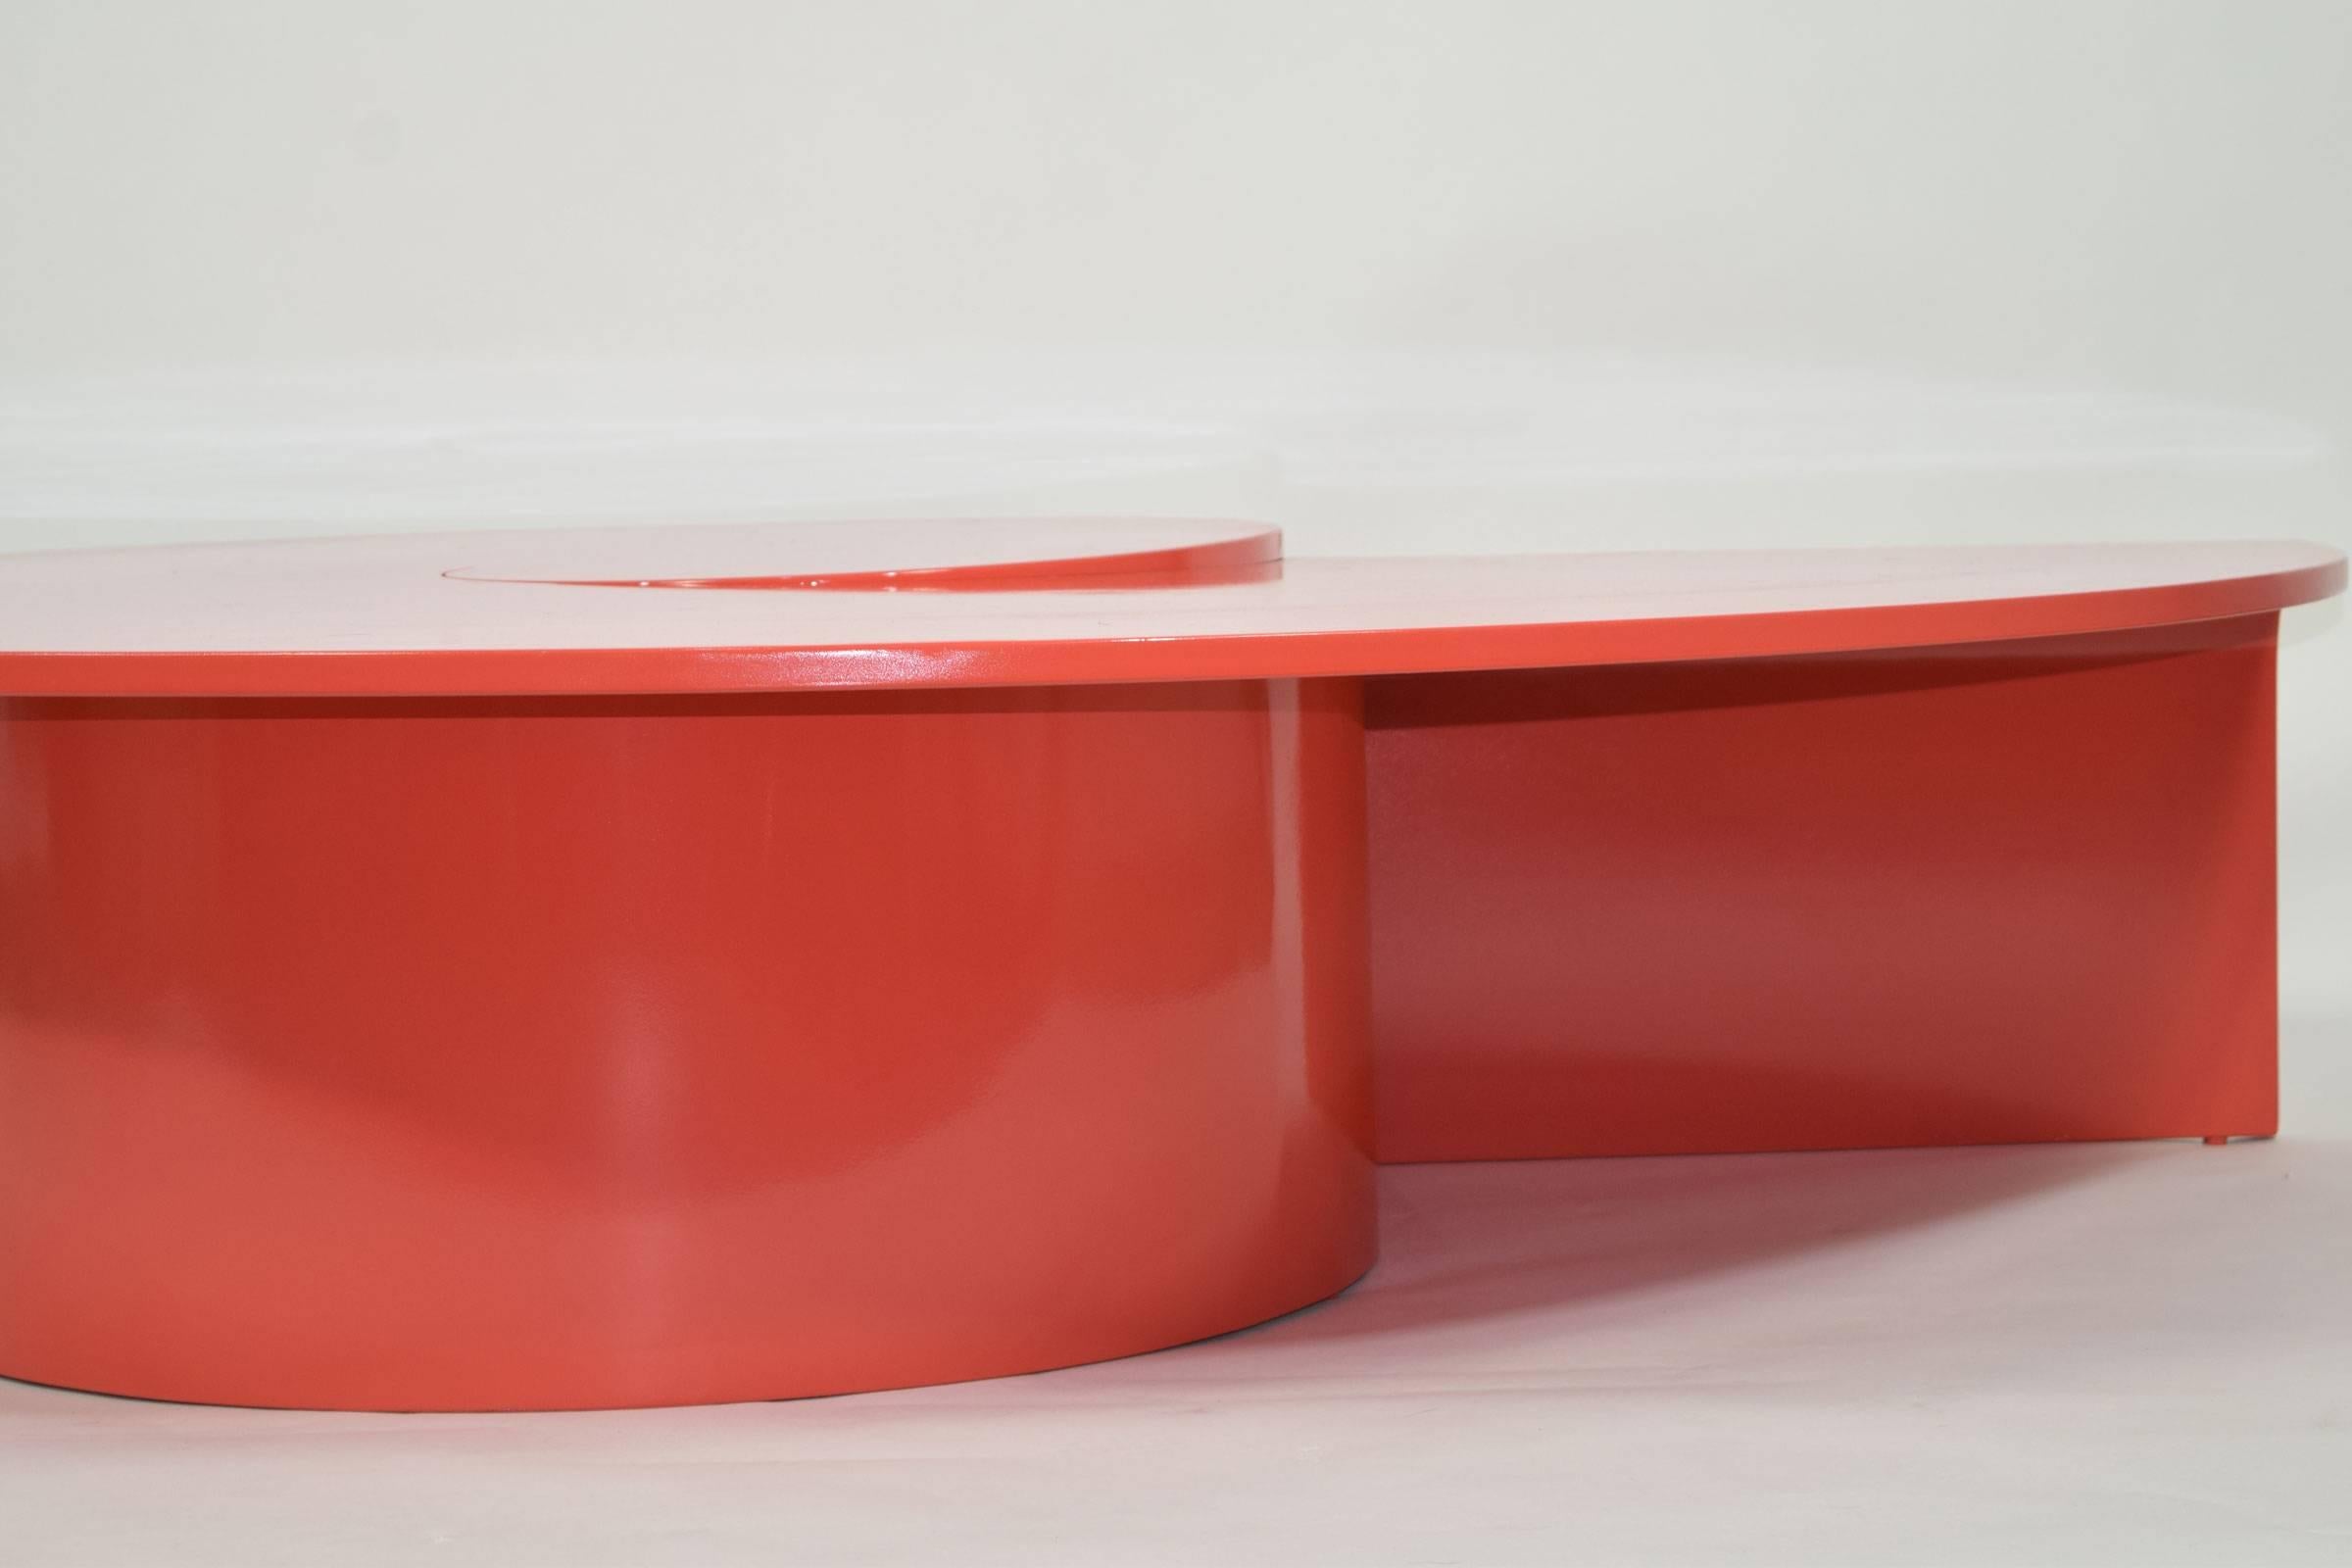 Fabulous Statement Coffee Table in Red/Orange Lacquer 1